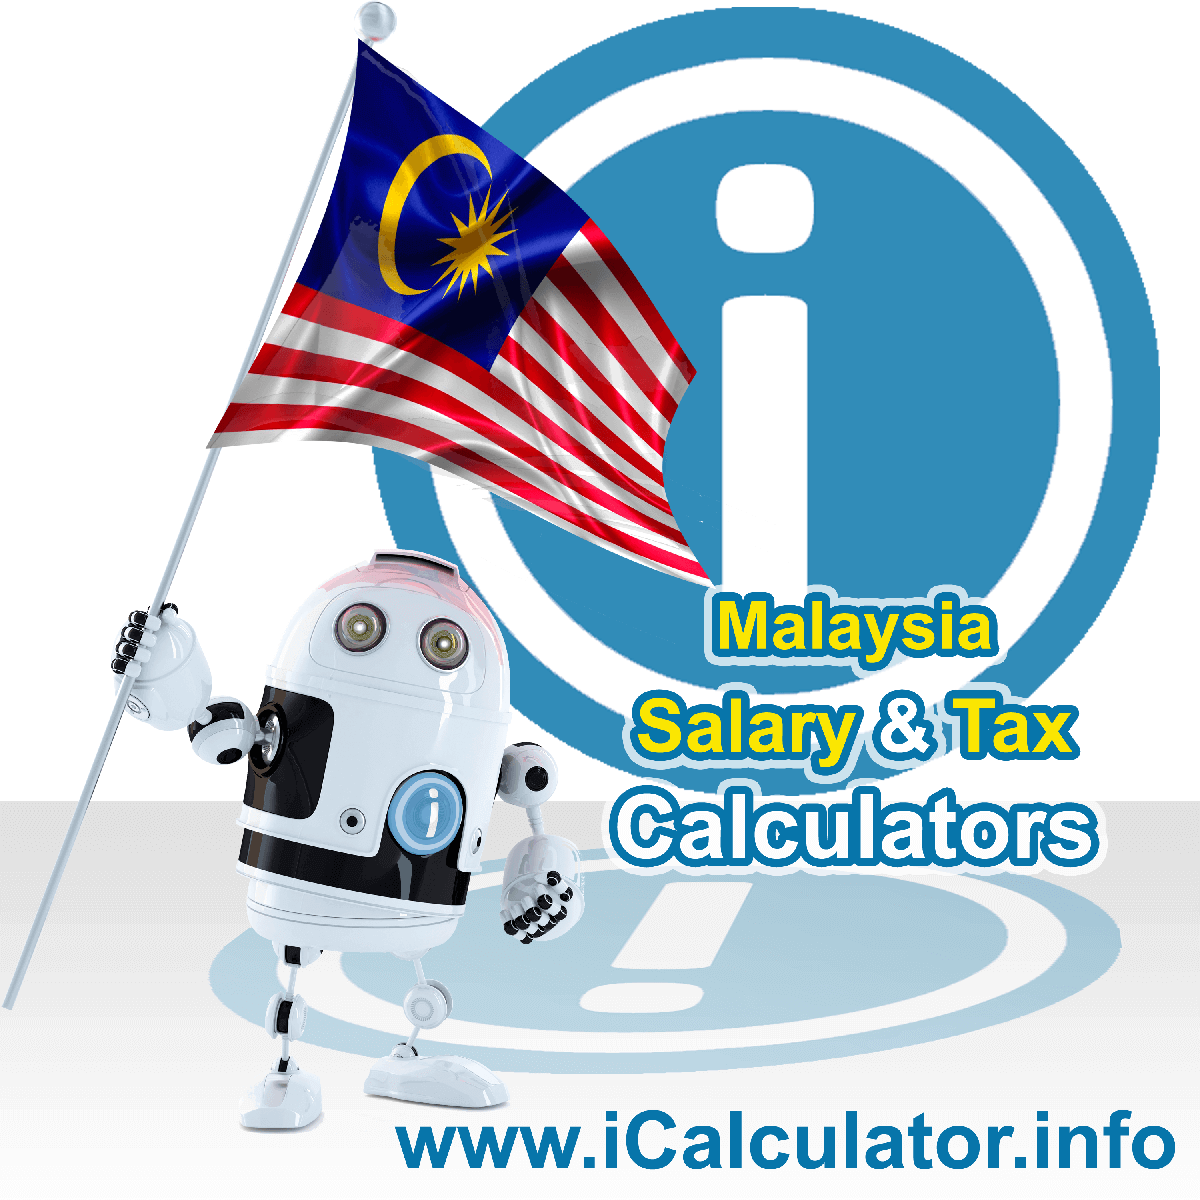 Malaysia Salary Calculator. This image shows the Malaysiaese flag and information relating to the tax formula for the Malaysia Tax Calculator